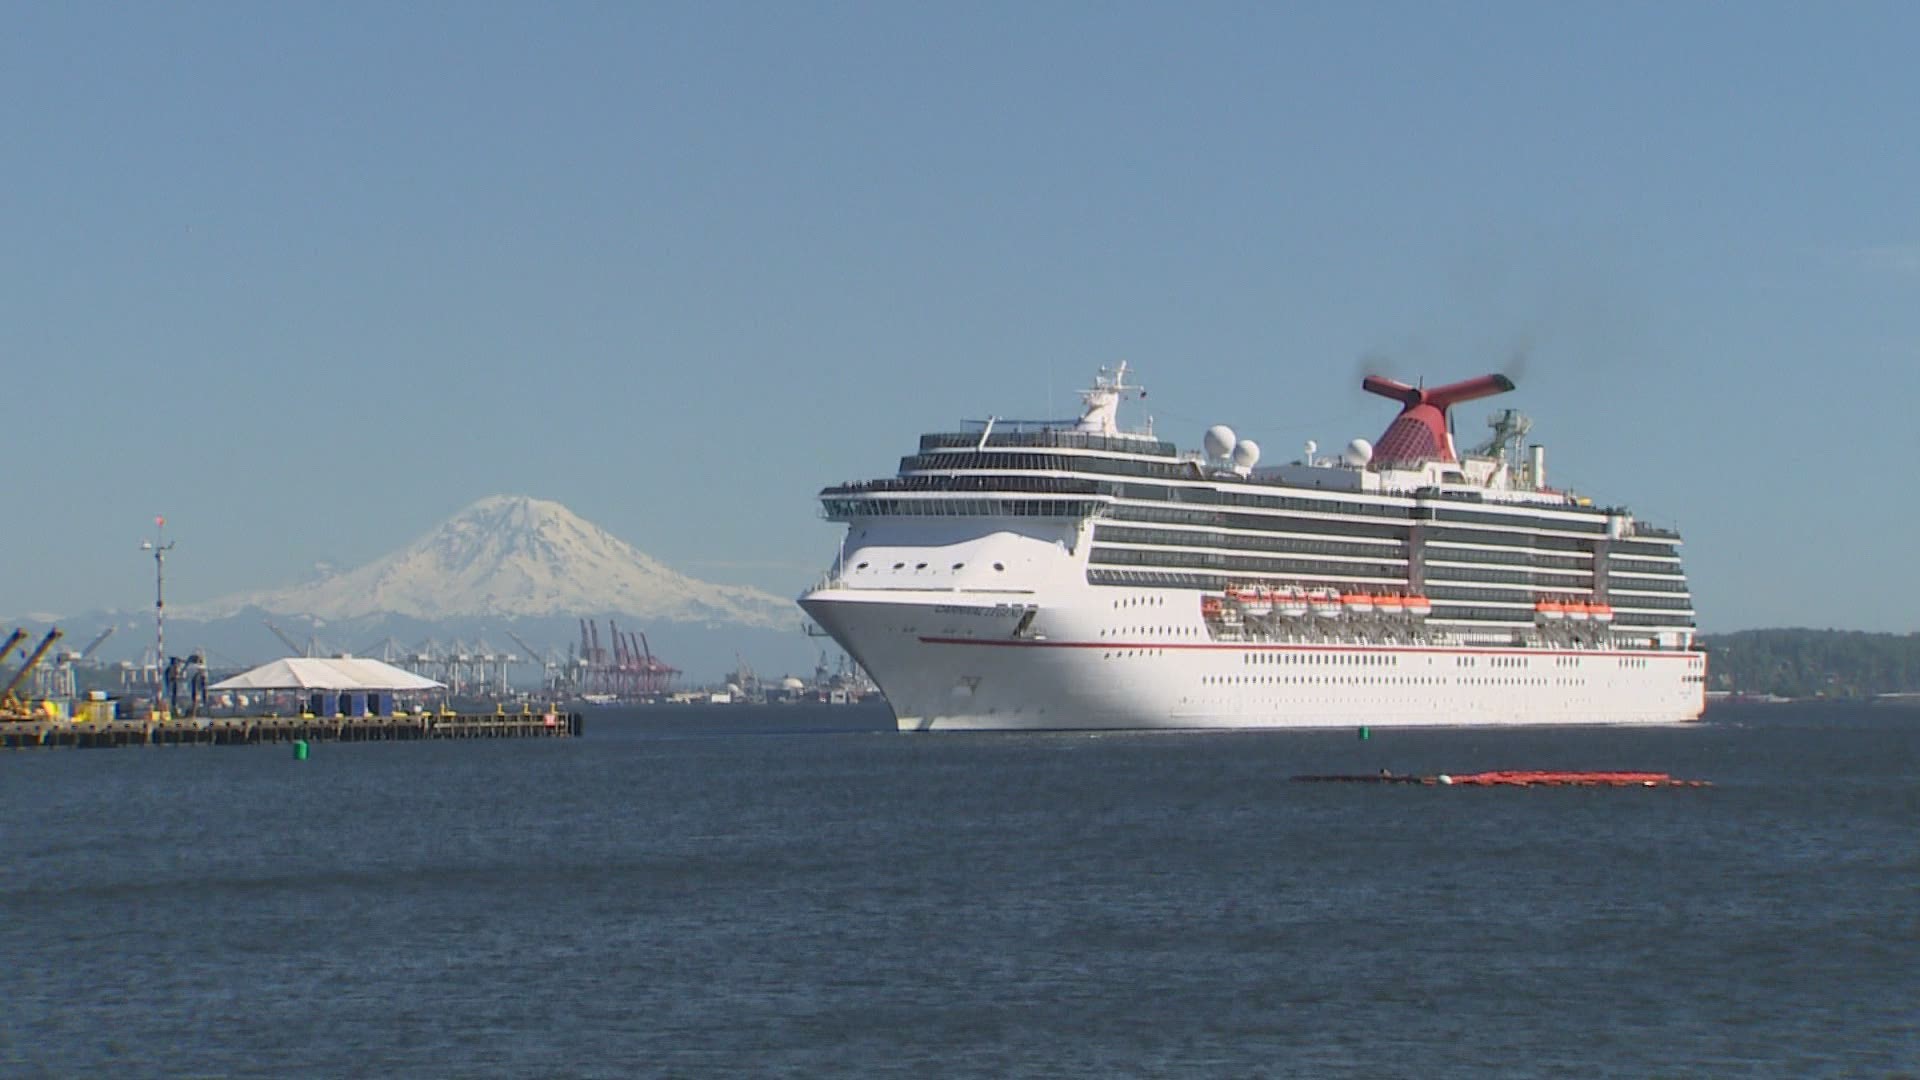 There is hope for saving what's nearly a billion dollar industry for Seattle - the cruise business. But as Glenn Farley reports, it's not a done deal yet.